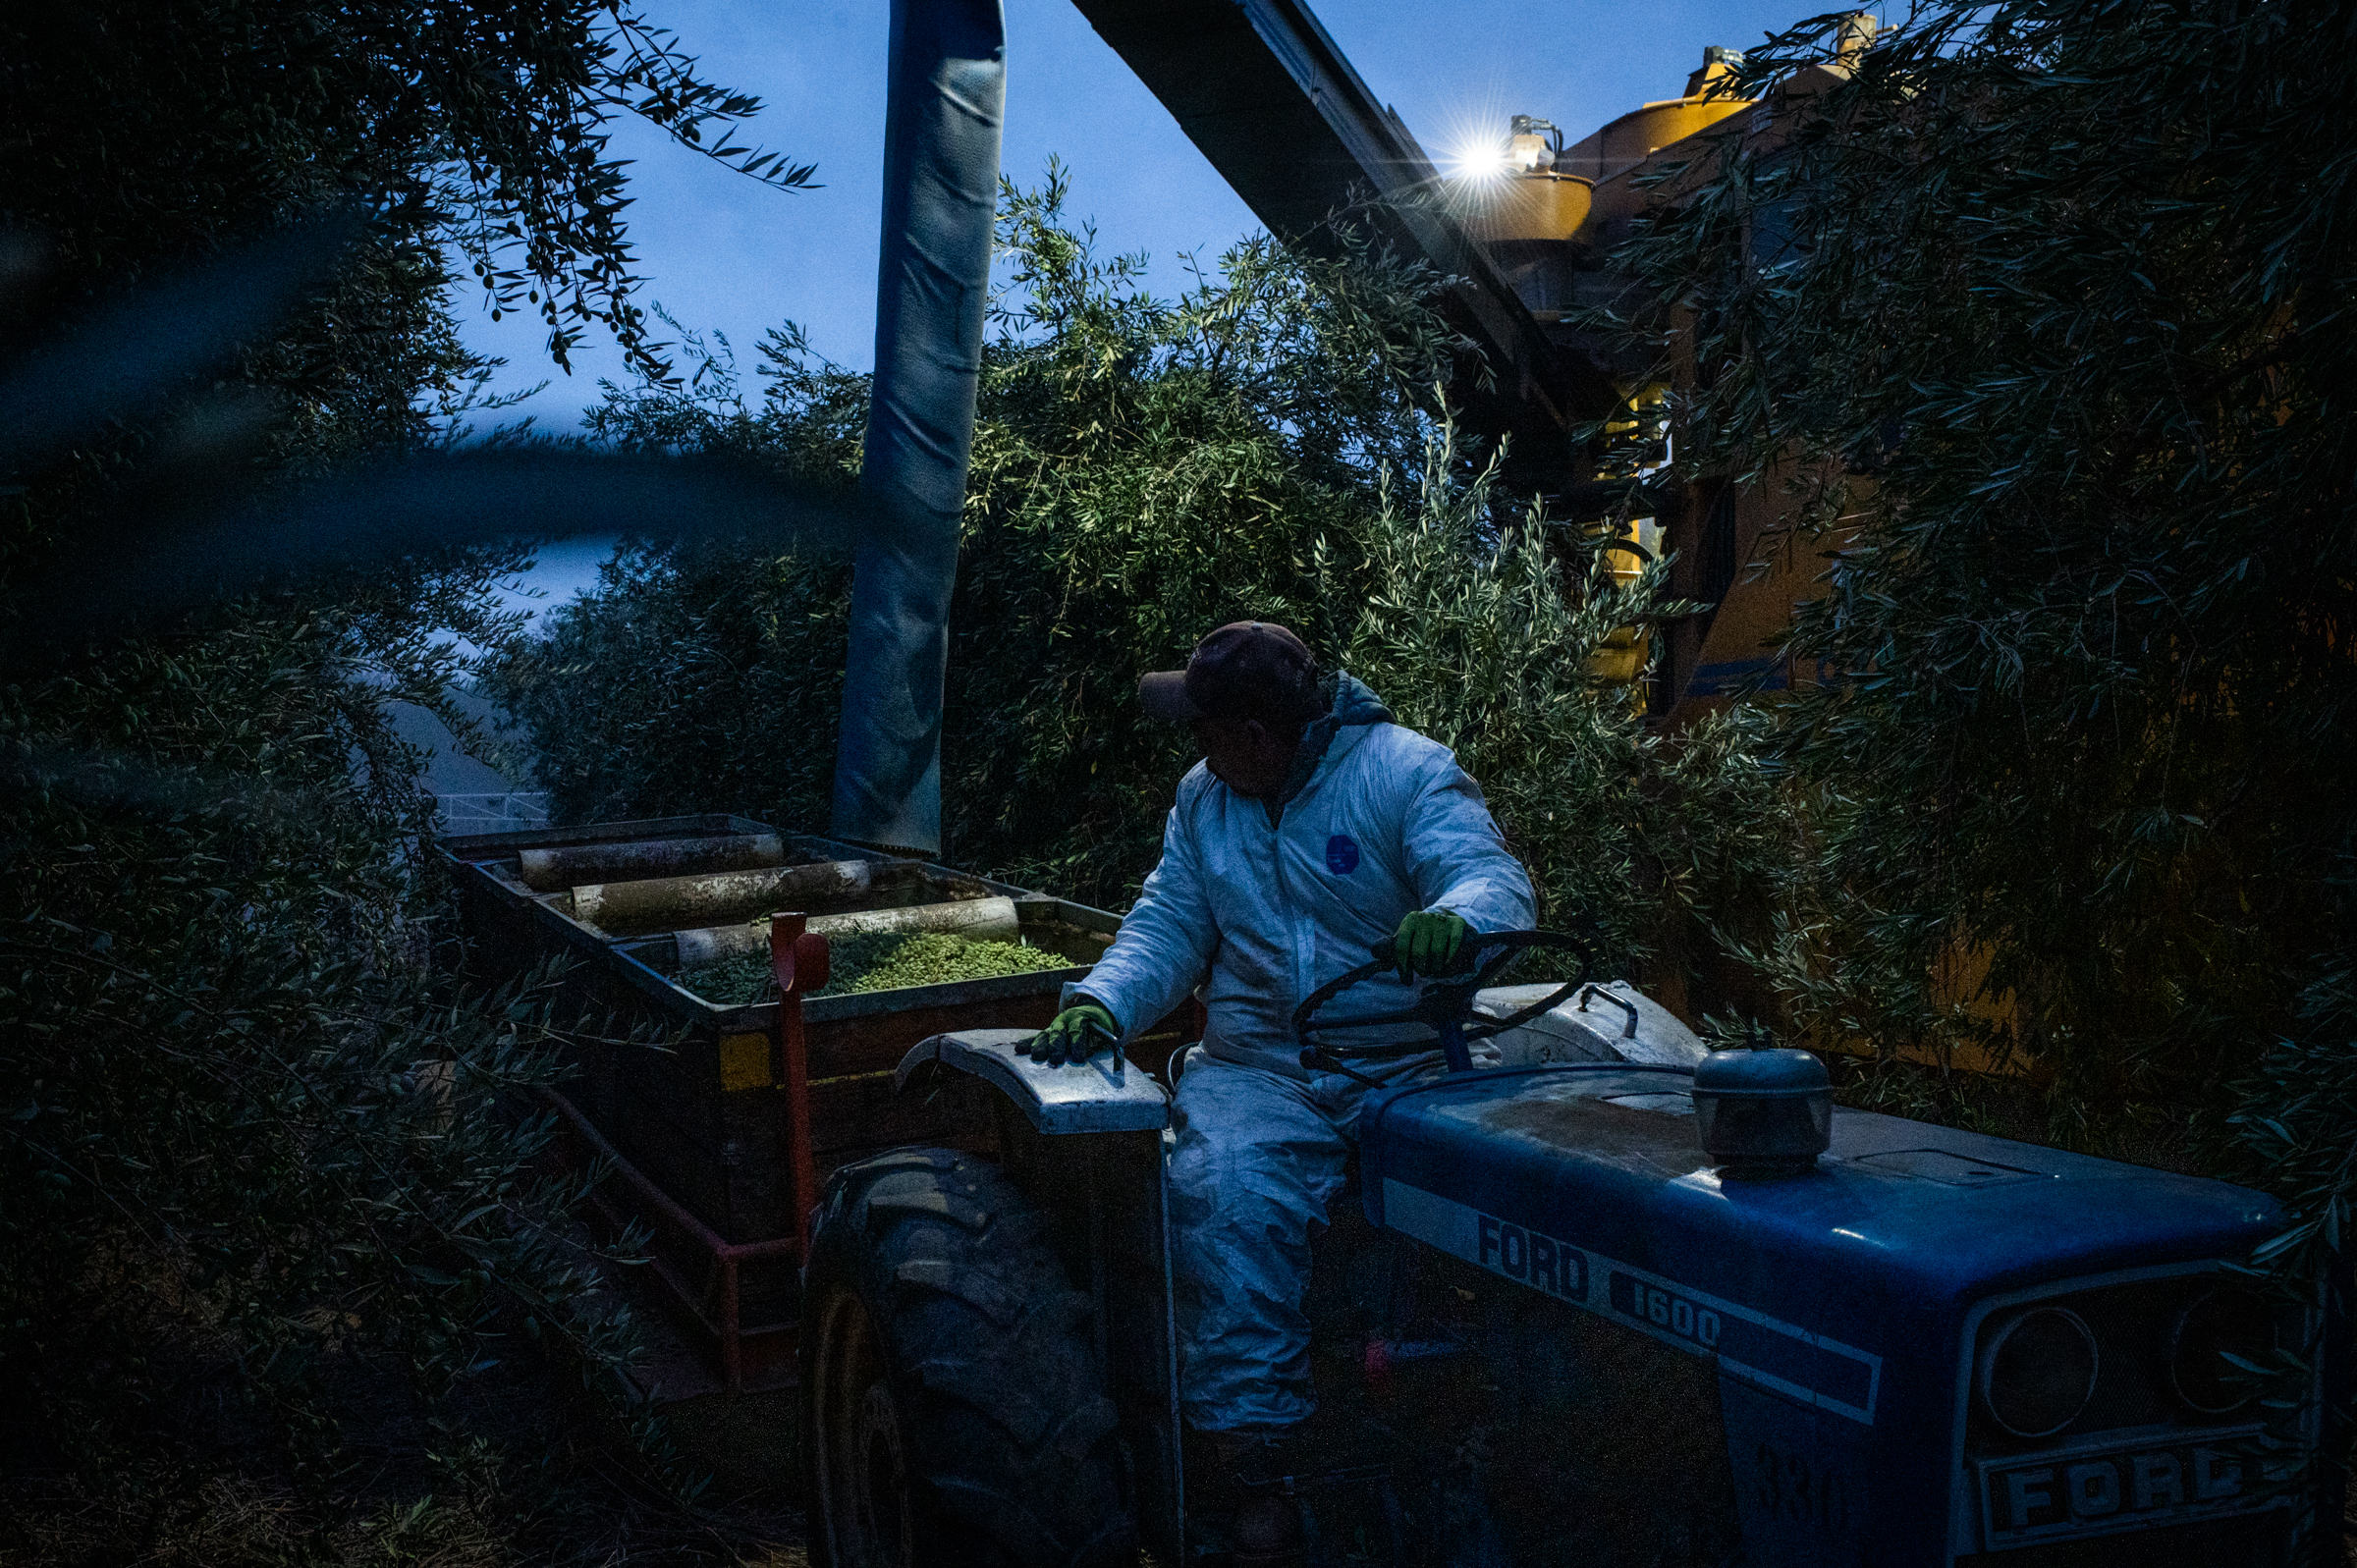 A tractor at dusk, driving parallel to the harvester to collect olives